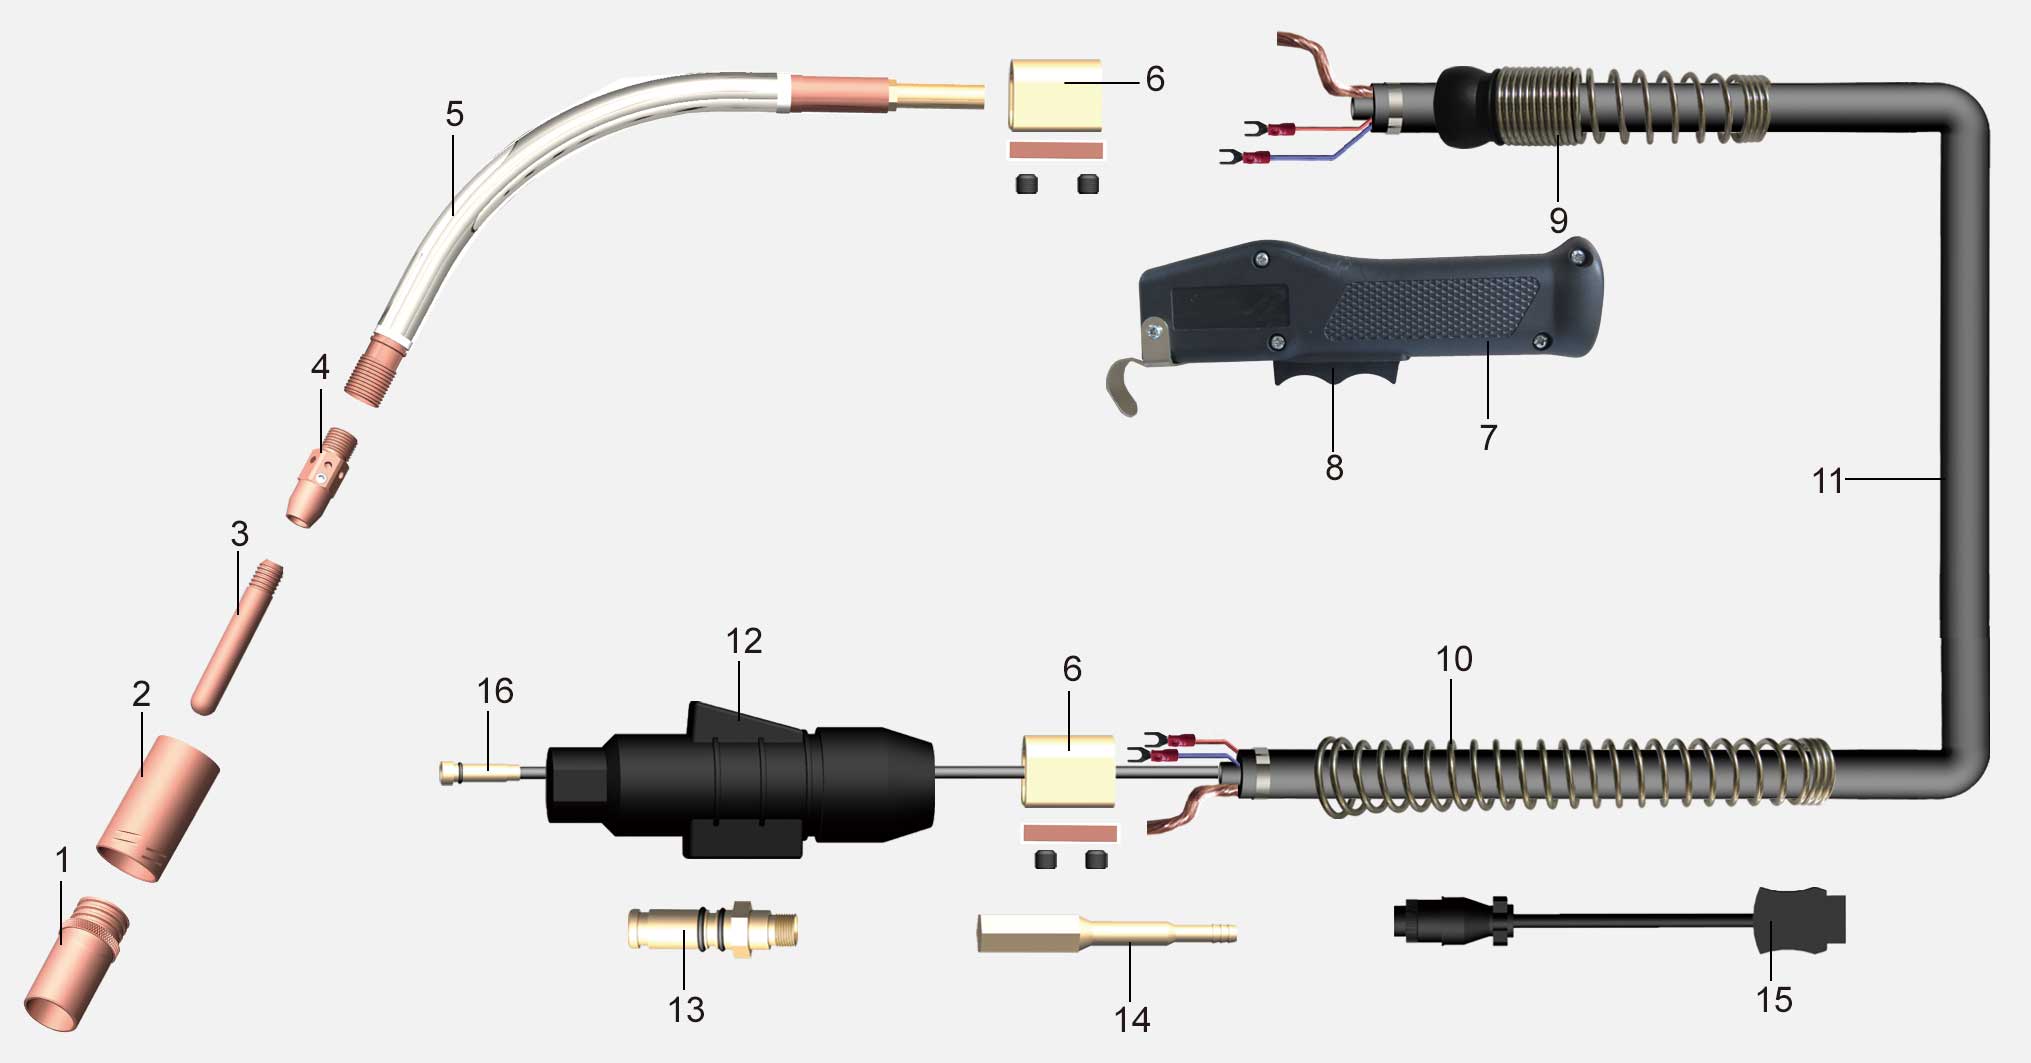 Product structure of the #5 Air cooled MIG/MAG welding torch